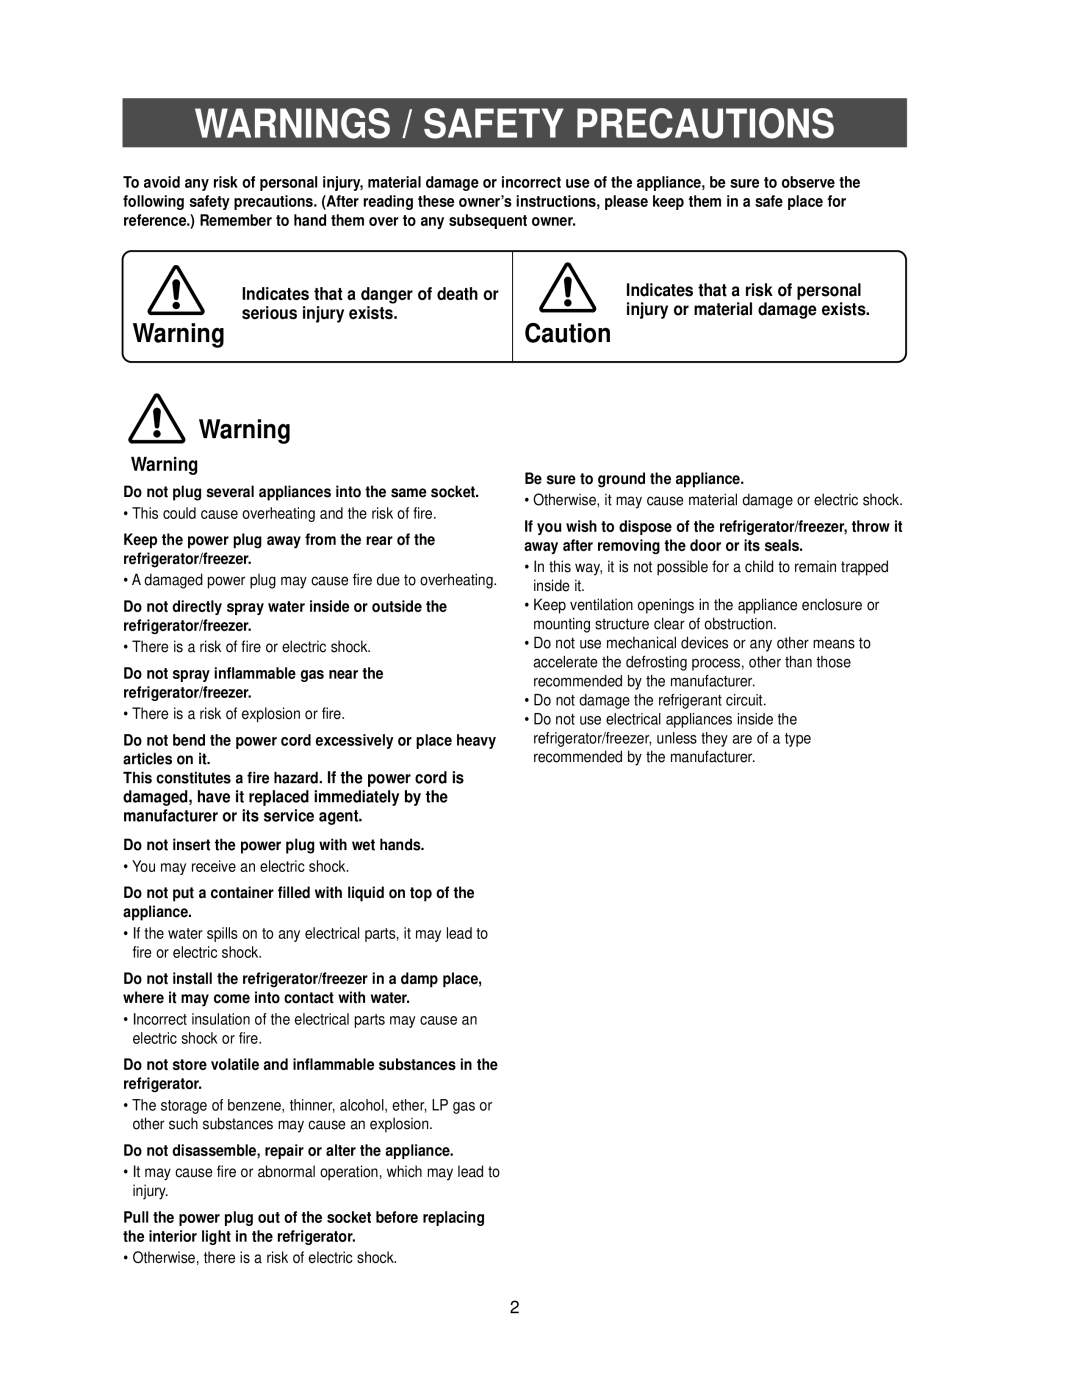 Samsung RB2055SL owner manual Warnings / Safety Precautions, Indicates that a danger of death or serious injury exists 